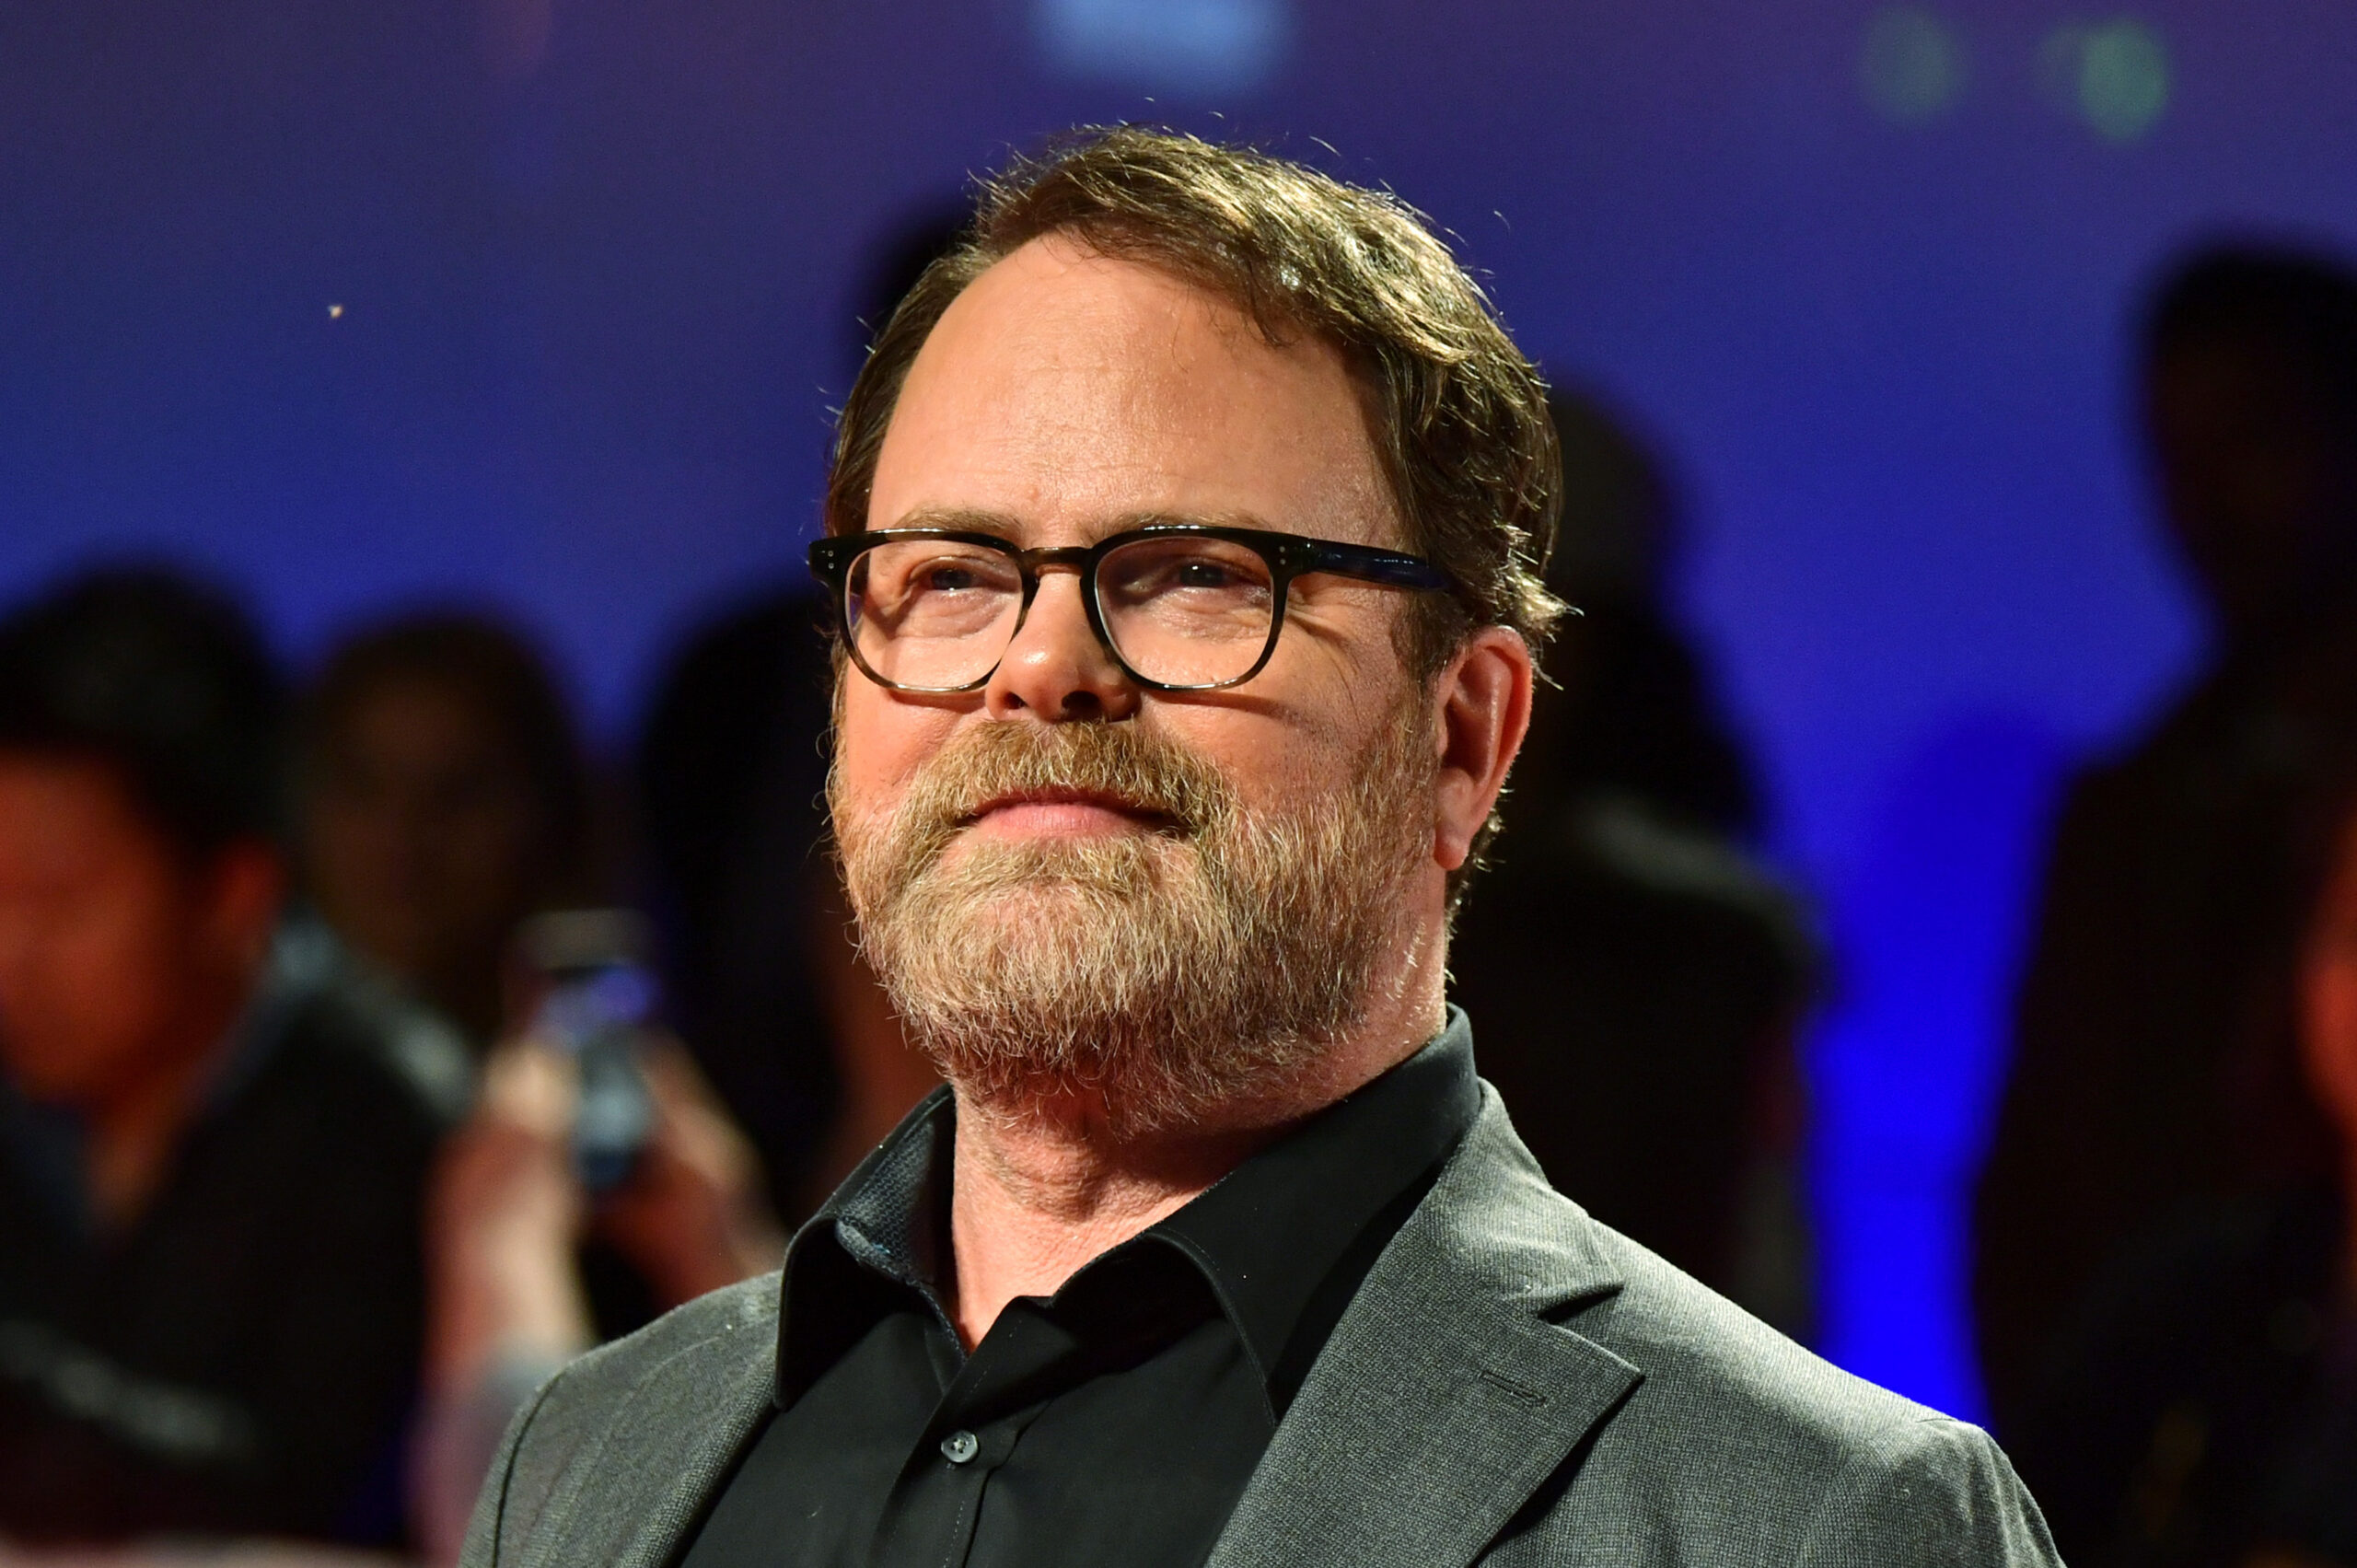 ‘The Office’ Actor Rainn Wilson Admits There’s ‘Anti-Christian Bias In Hollywood’ Following ‘The Last Of Us’ Episode